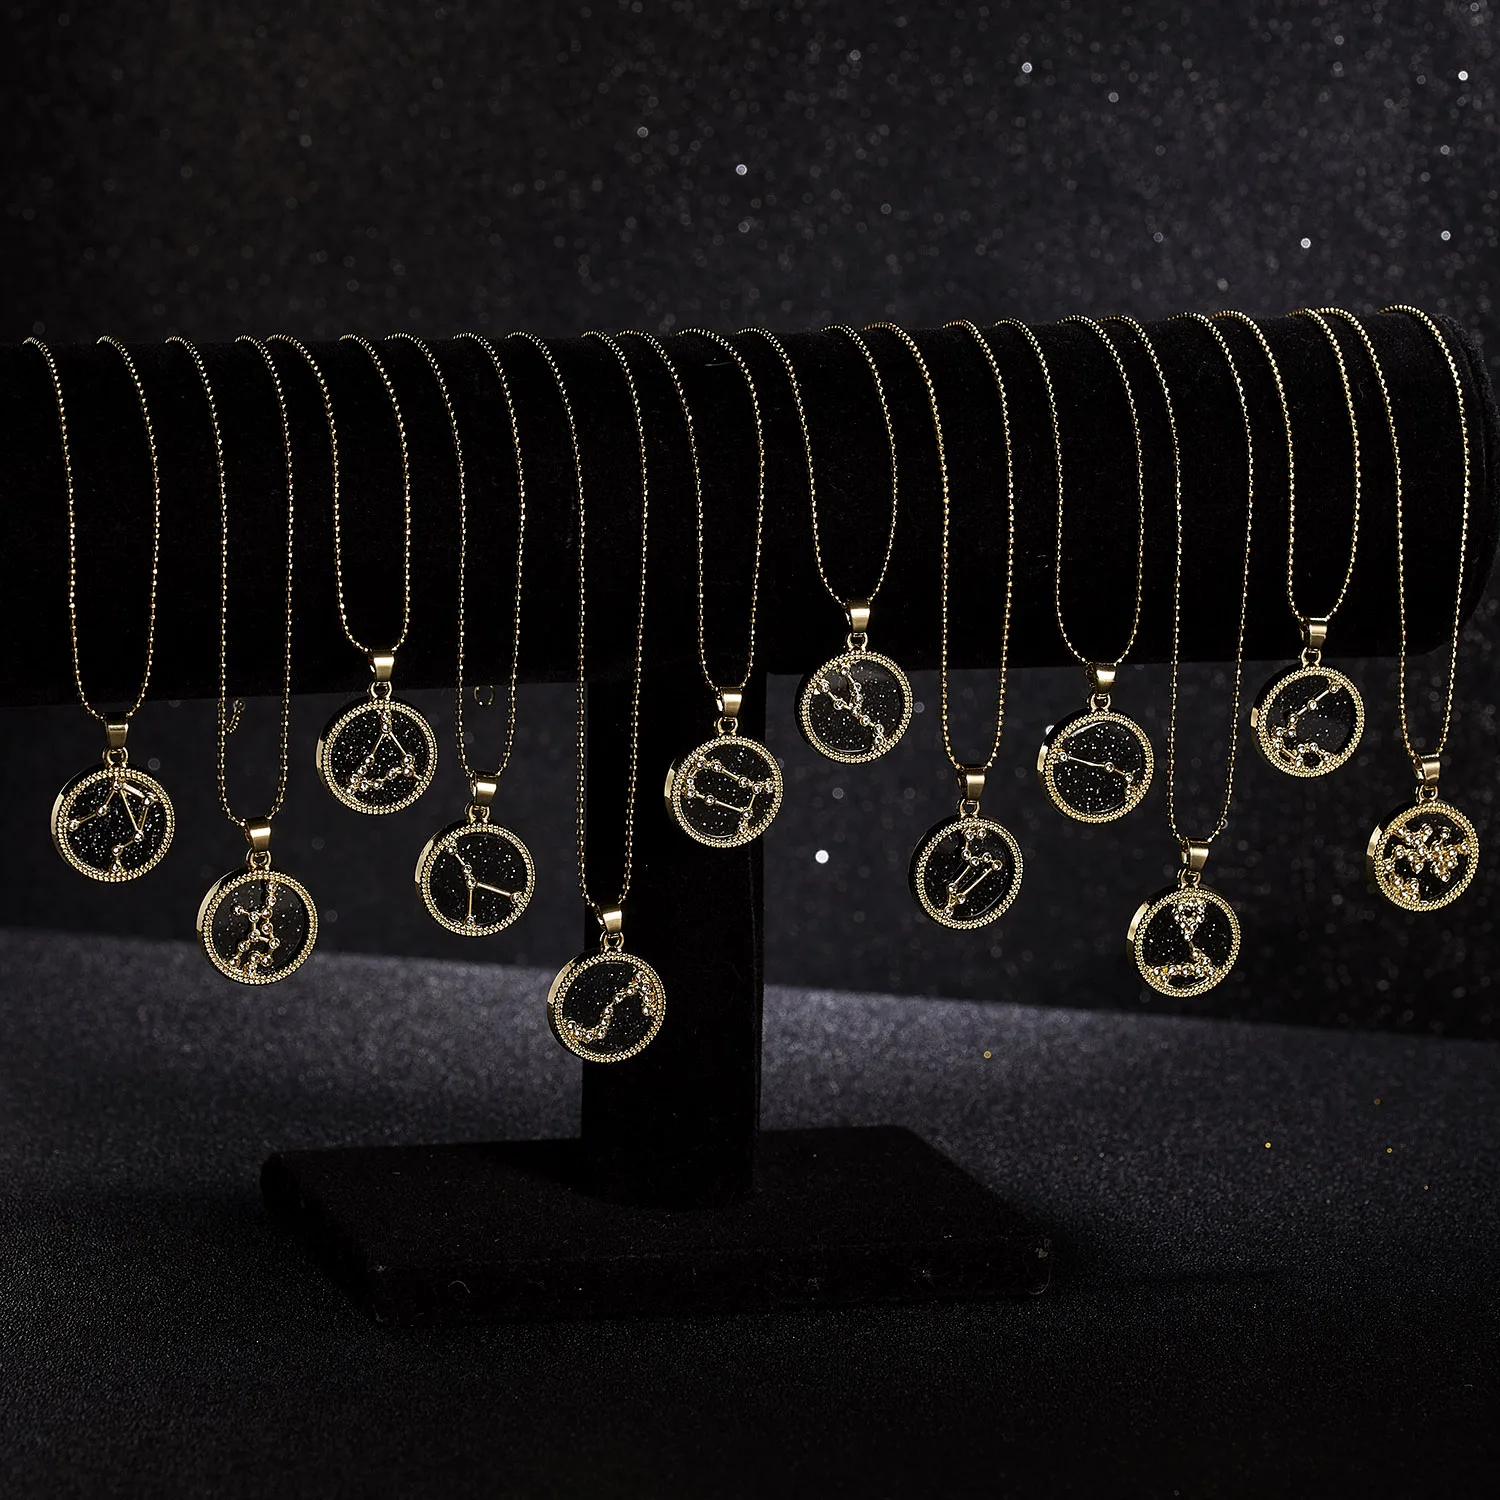 

12 Star Zodiac Necklace Round Pendant Cardboard Gold Silver Color Jewelry for Lover Men Women Girls Boys Couples Gift